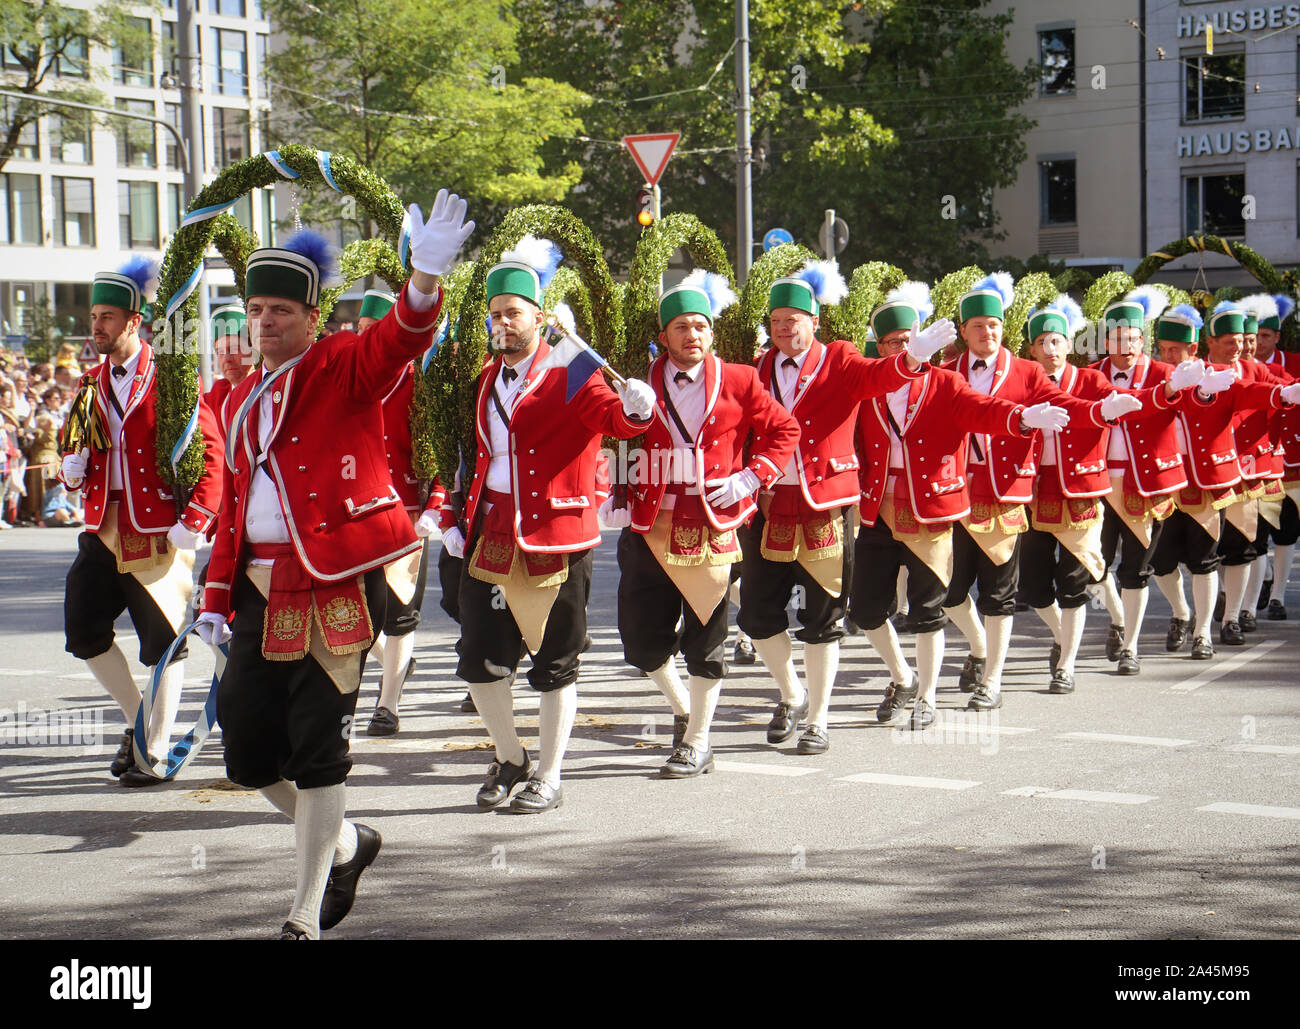 MUNICH, GERMANY - SEPTEMBER 22, 2019 Grand entry of the Oktoberfest landlords and breweries, festive parade of magnificent decorated carriages and ban Stock Photo